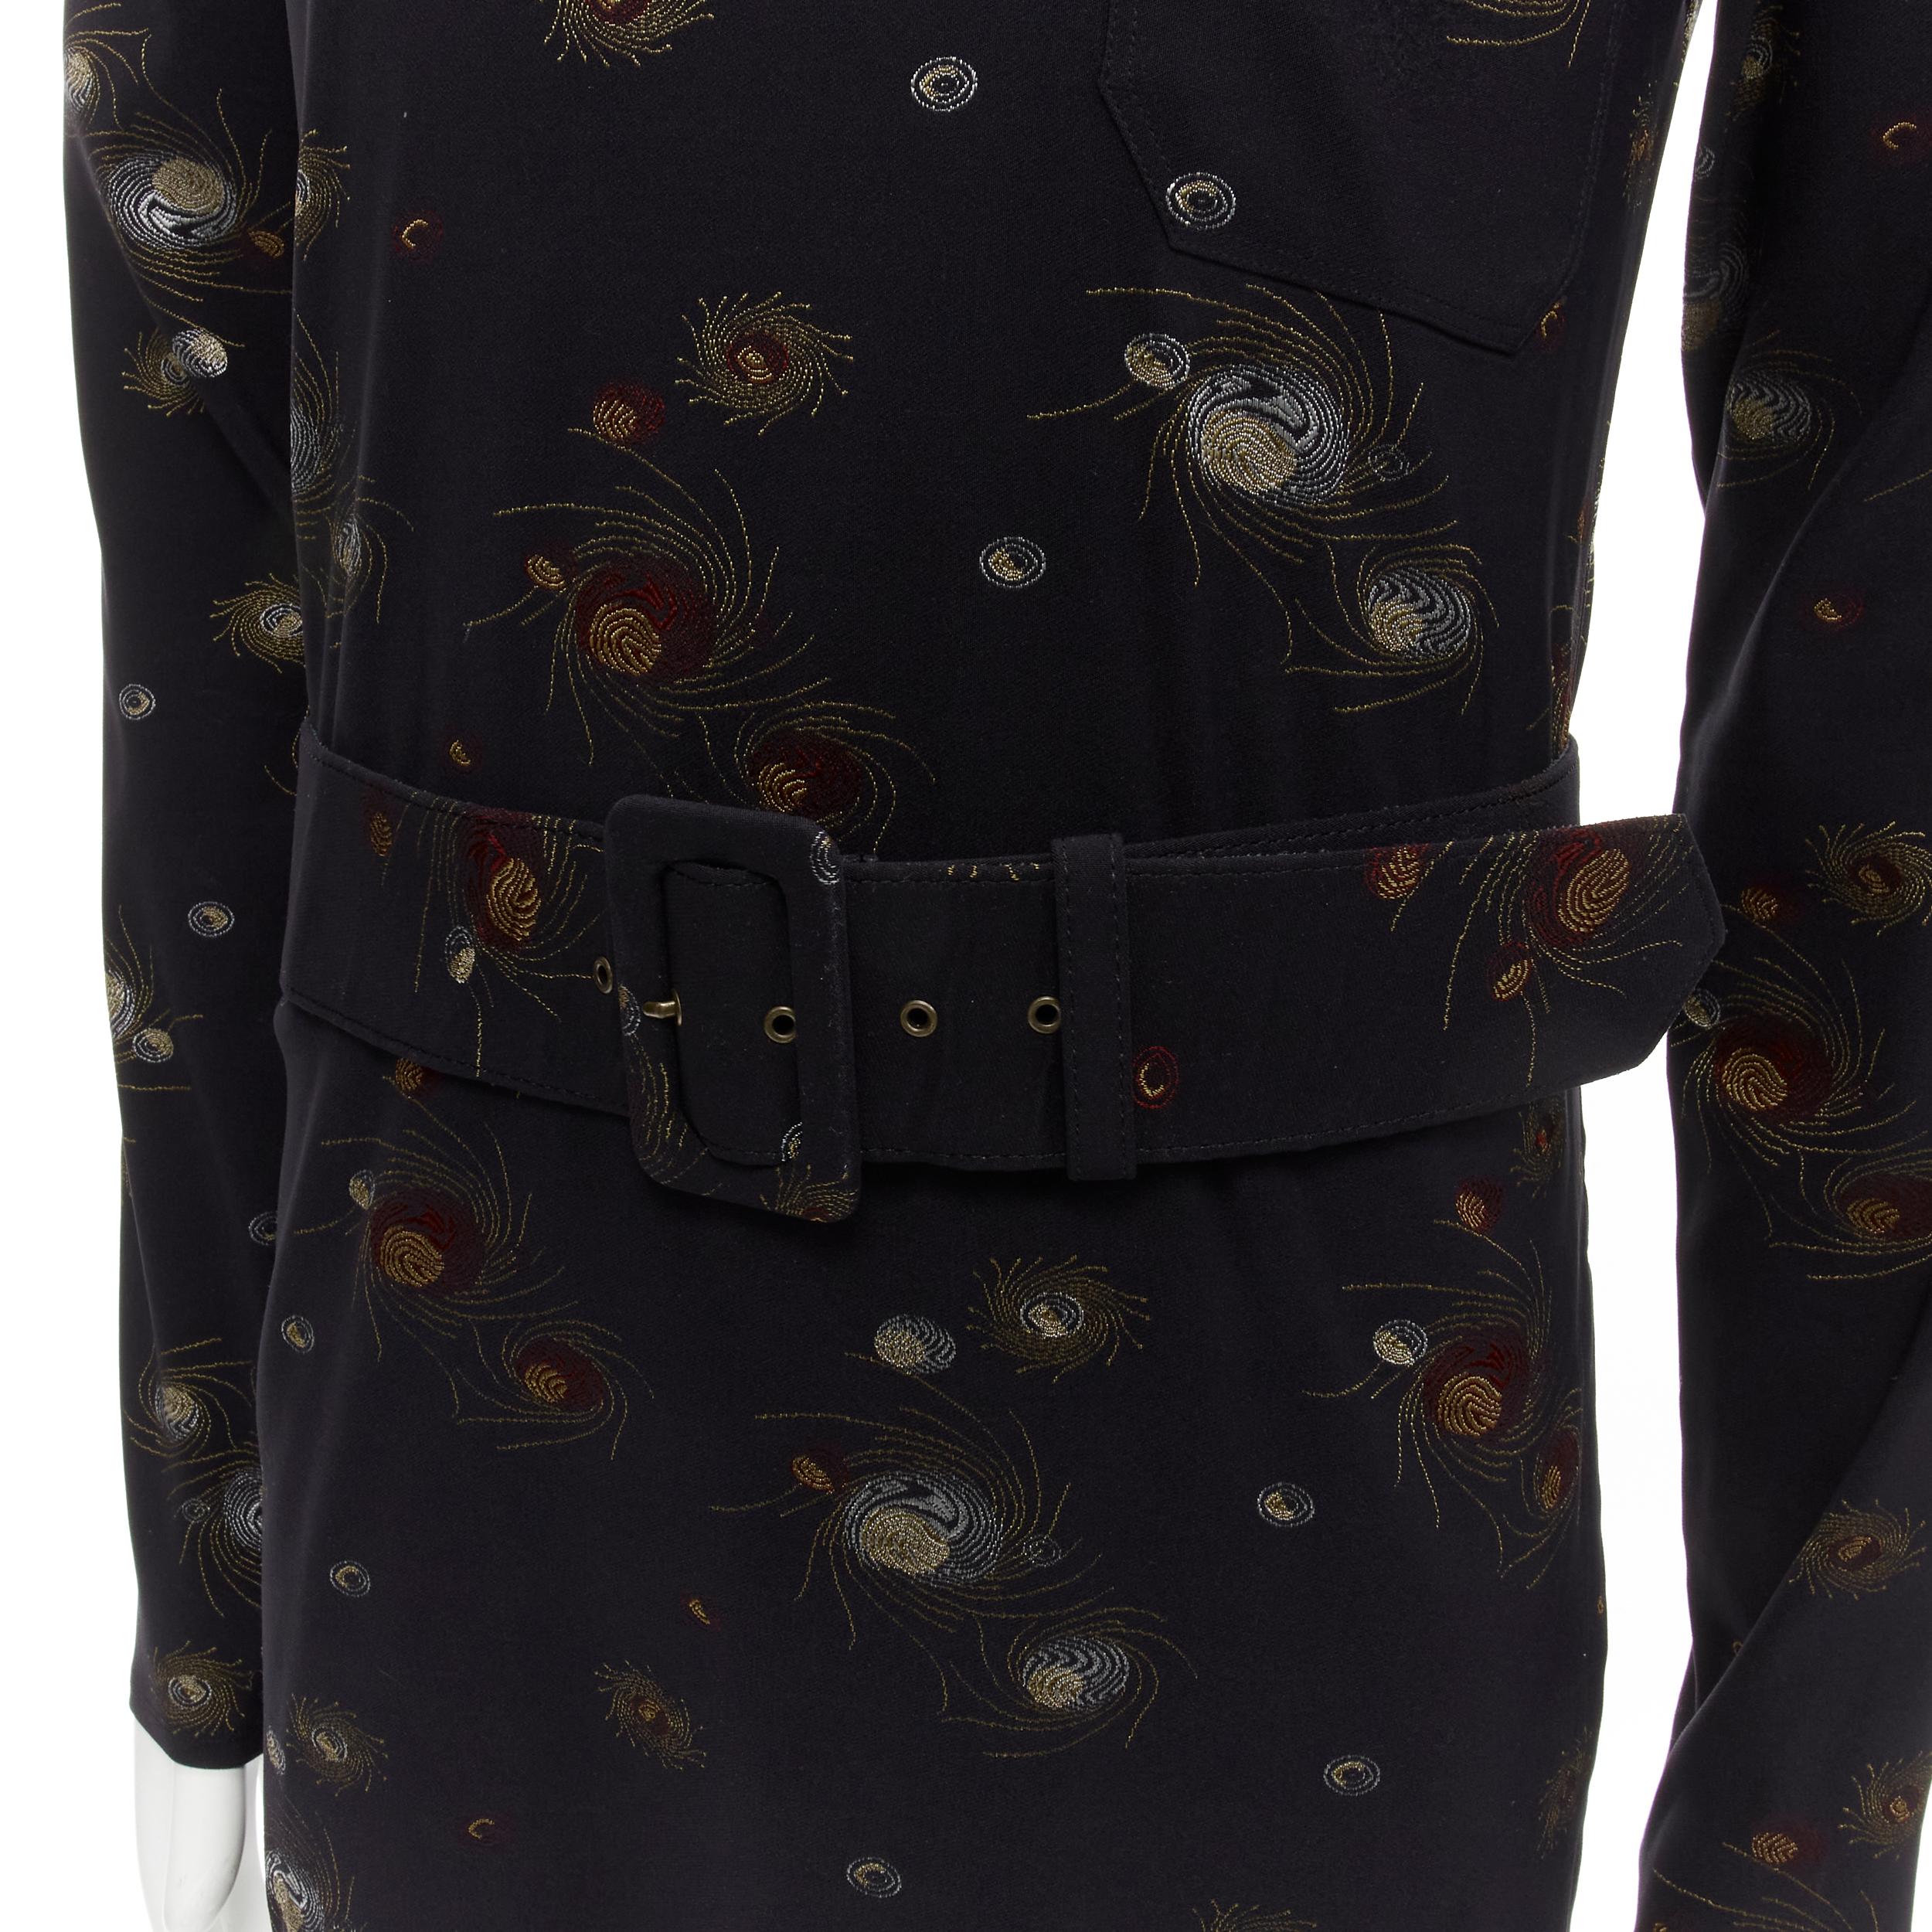 JEAN PAUL GAULTIER Homme Vintage black swirl brocade belted tunic top IT48 M
Reference: TGAS/C01740
Brand: Jean Paul Gaultier
Designer: Jean Paul Gaultier
Material: Nylon, Polyester
Color: Black
Pattern: Brocade
Closure: Belt
Extra Details: JPG